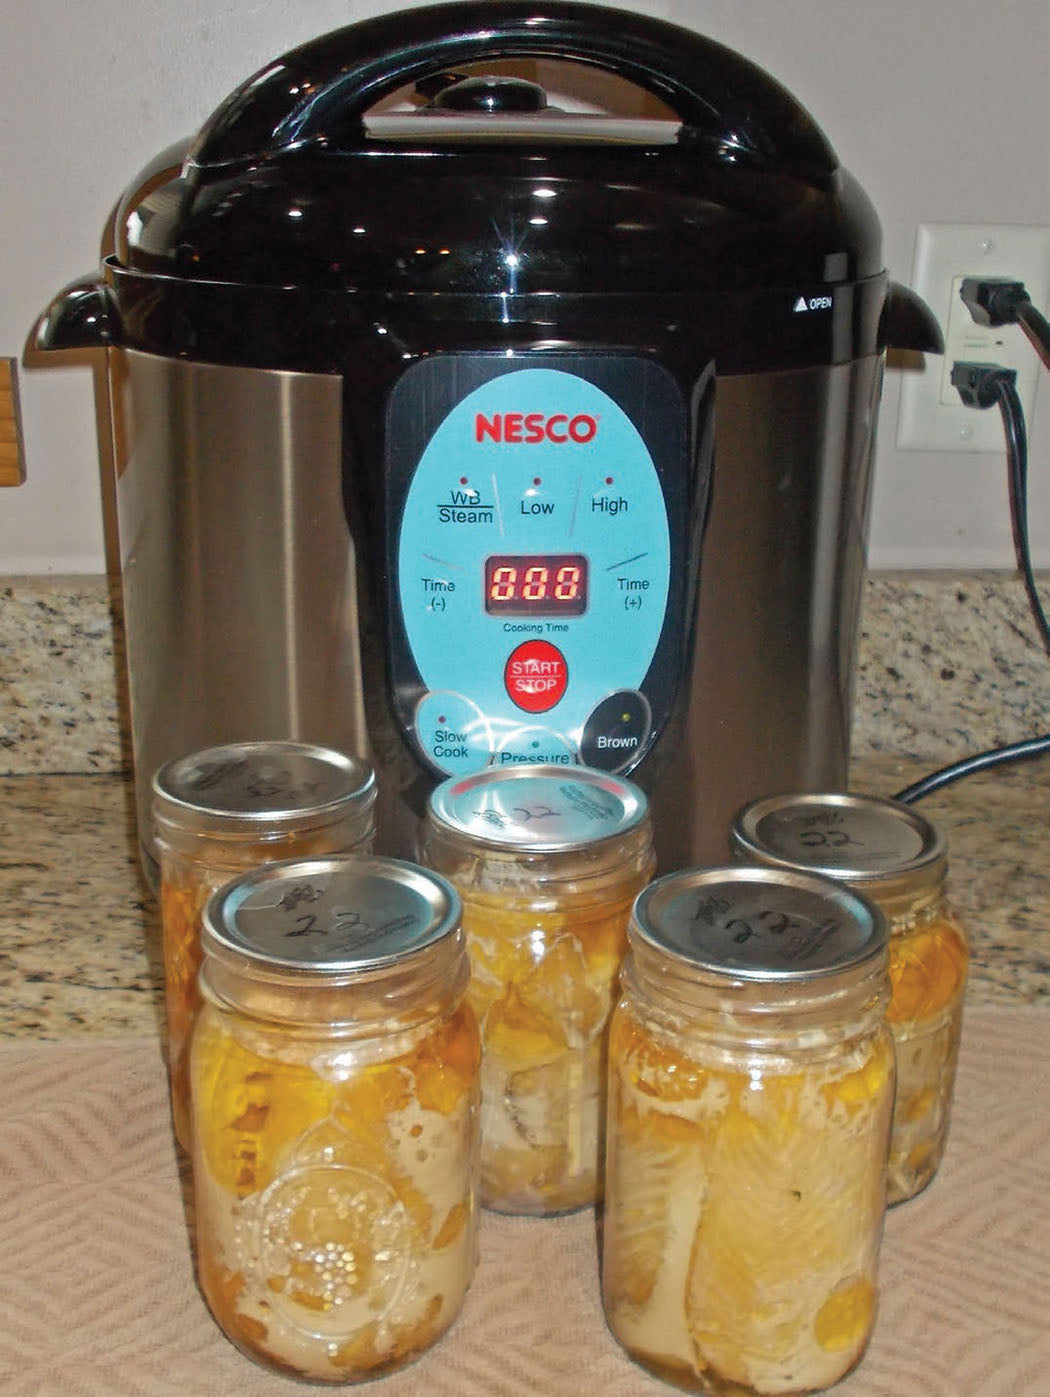 Is the Nesco Pressure Canner Safe?